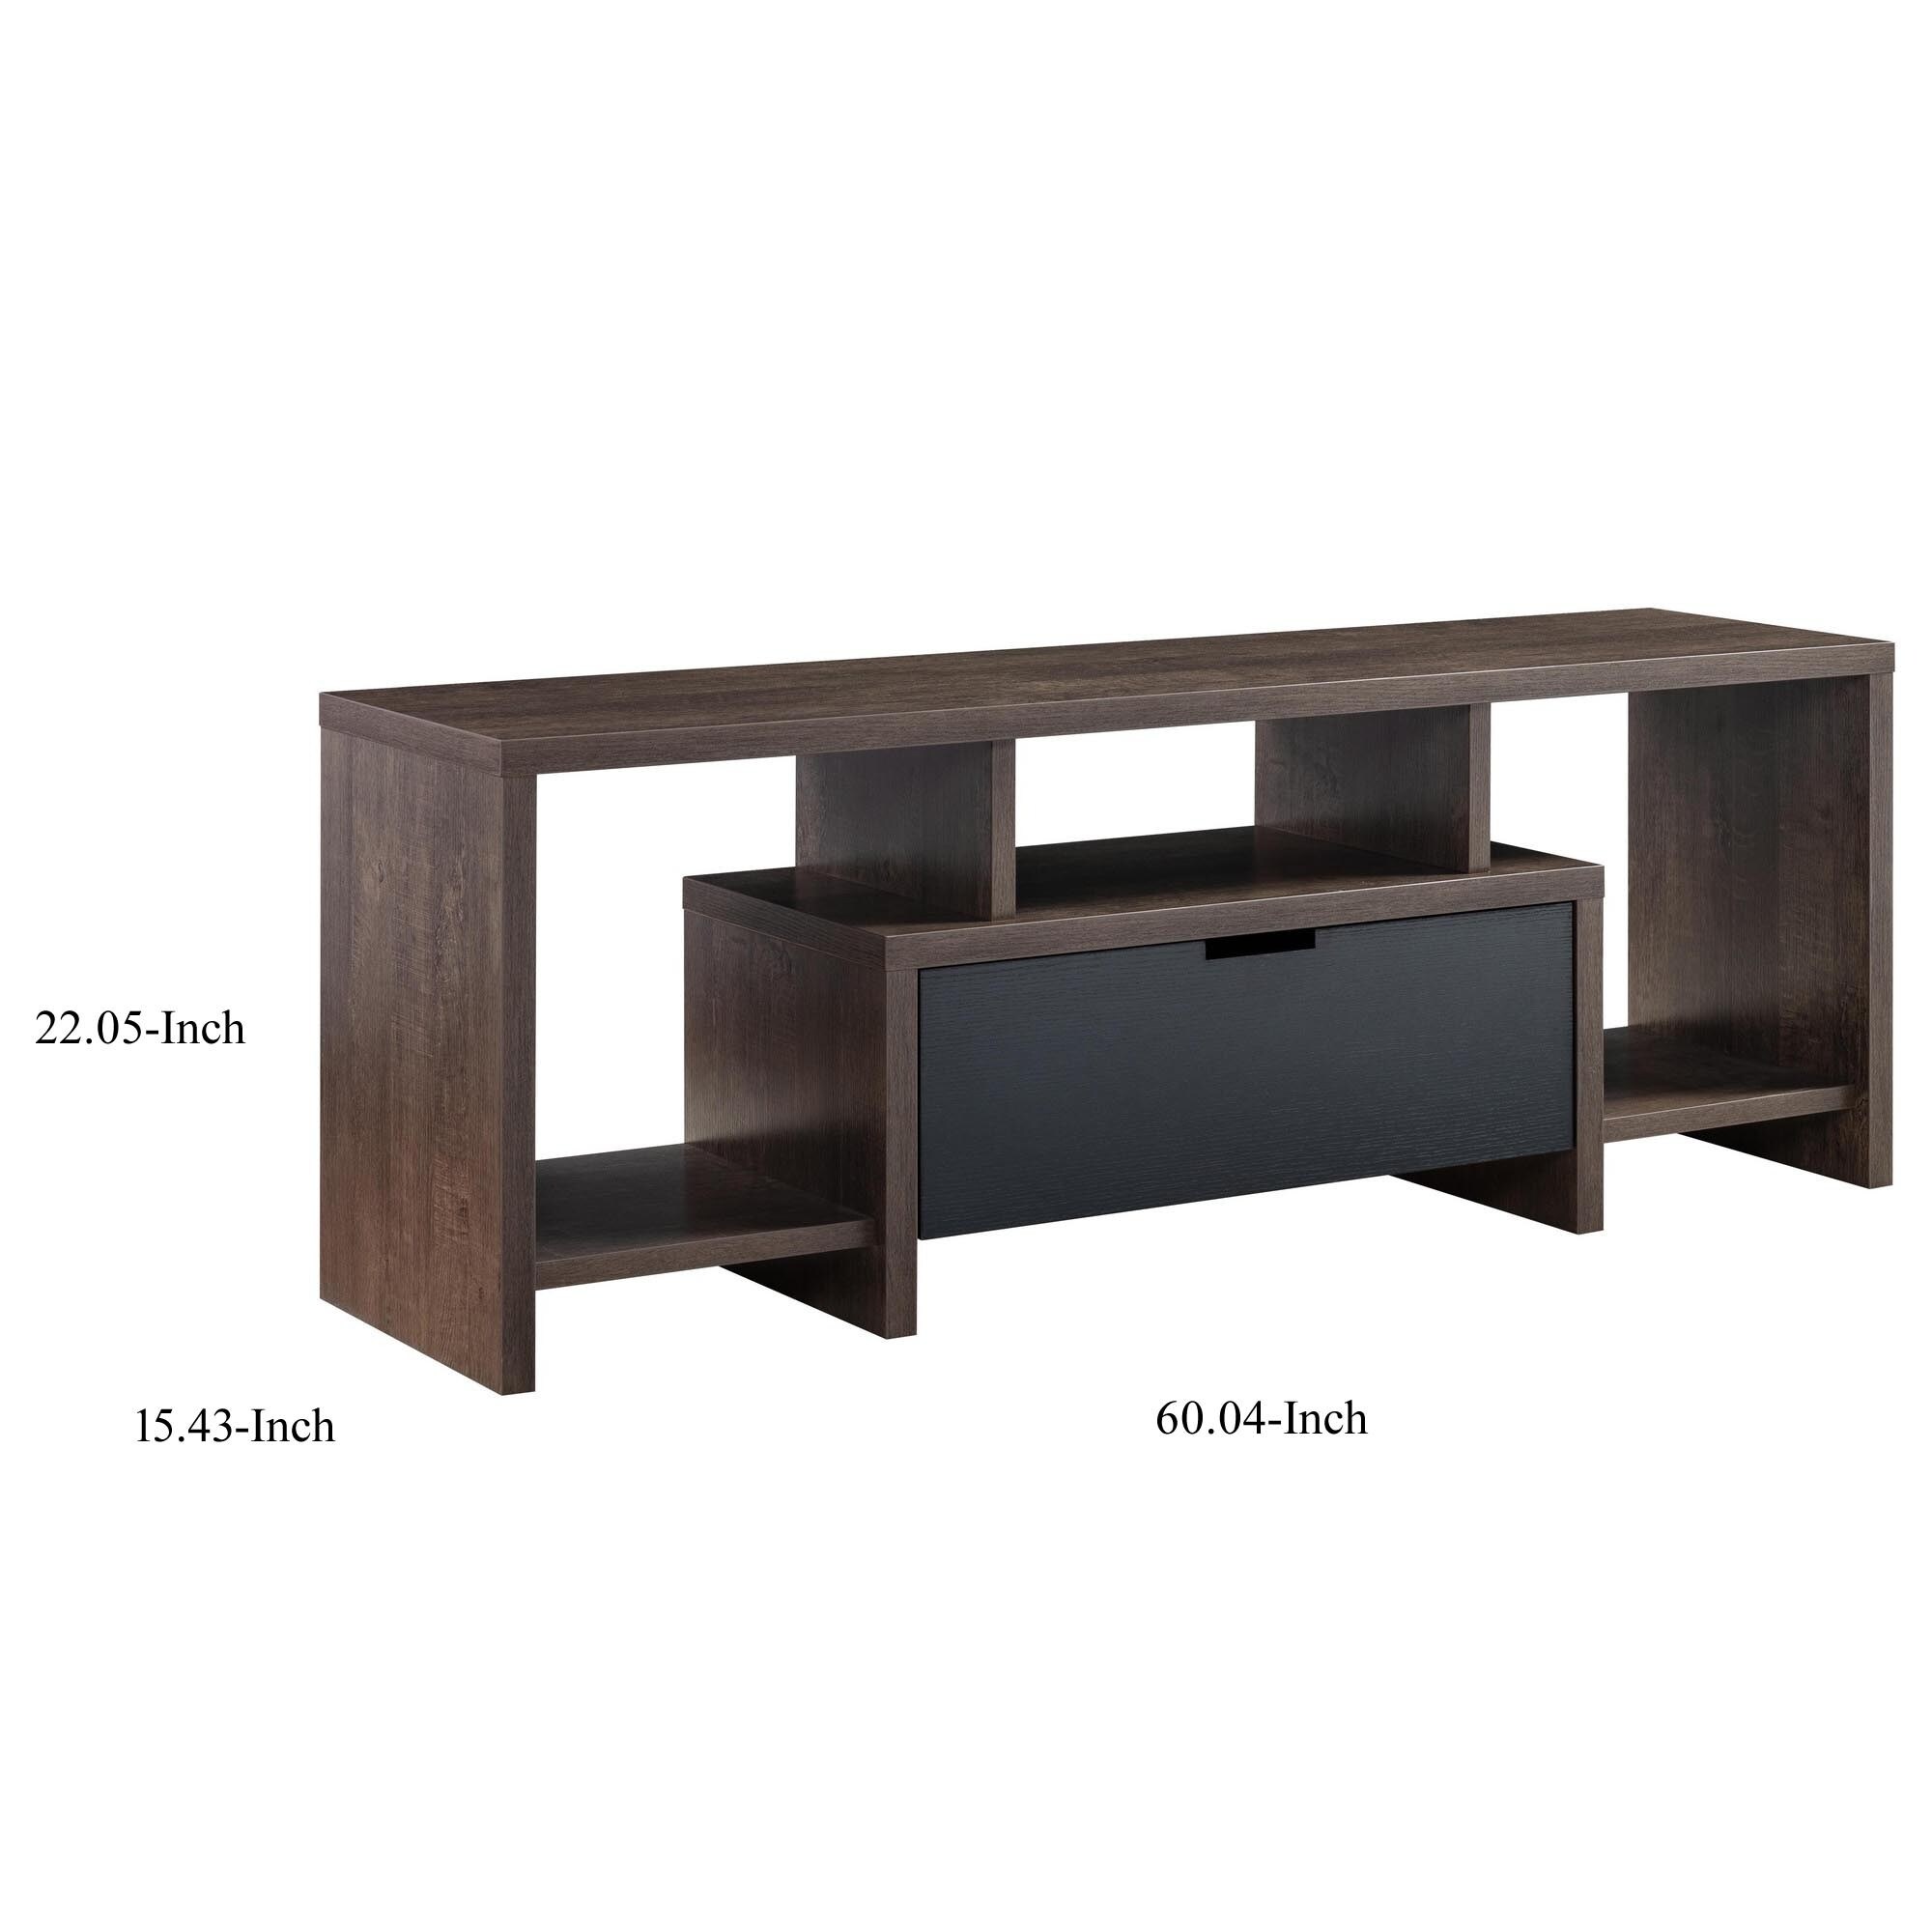 Elle 60 Inch TV Media Entertainment Console, 3 Compartments, Drawer, Walnut - image 5 of 5